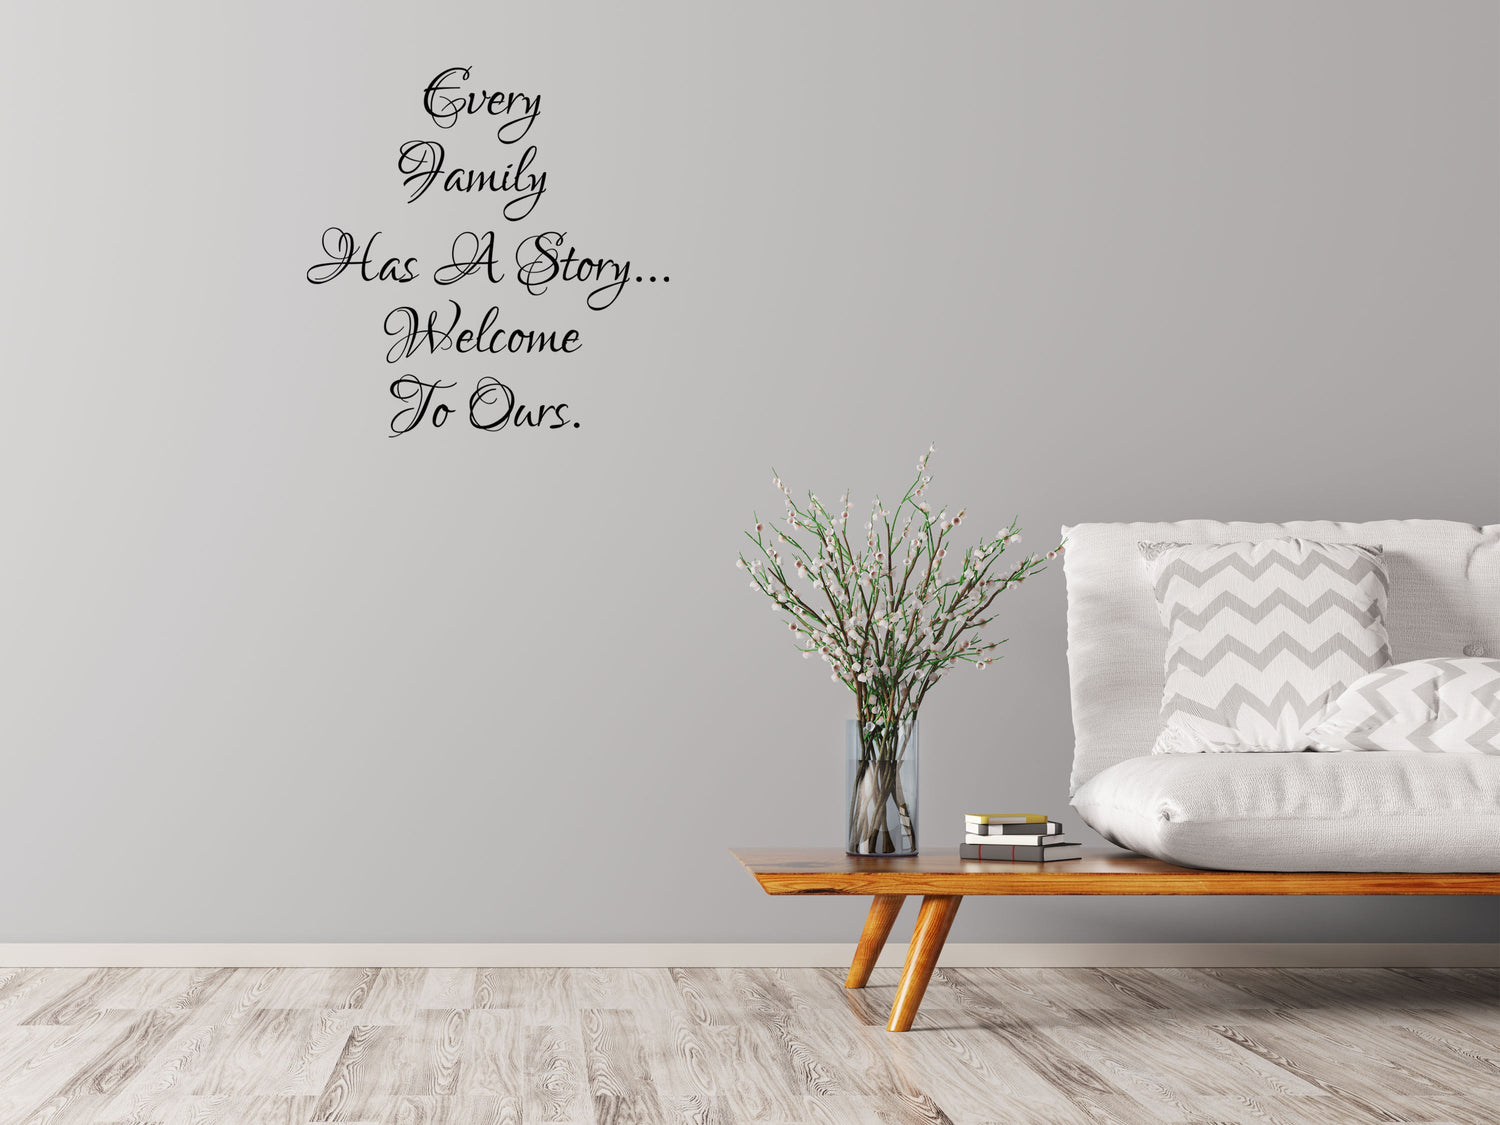 Every Family Has A Story Vinyl Wall Decal Inspirational Wall Signs 